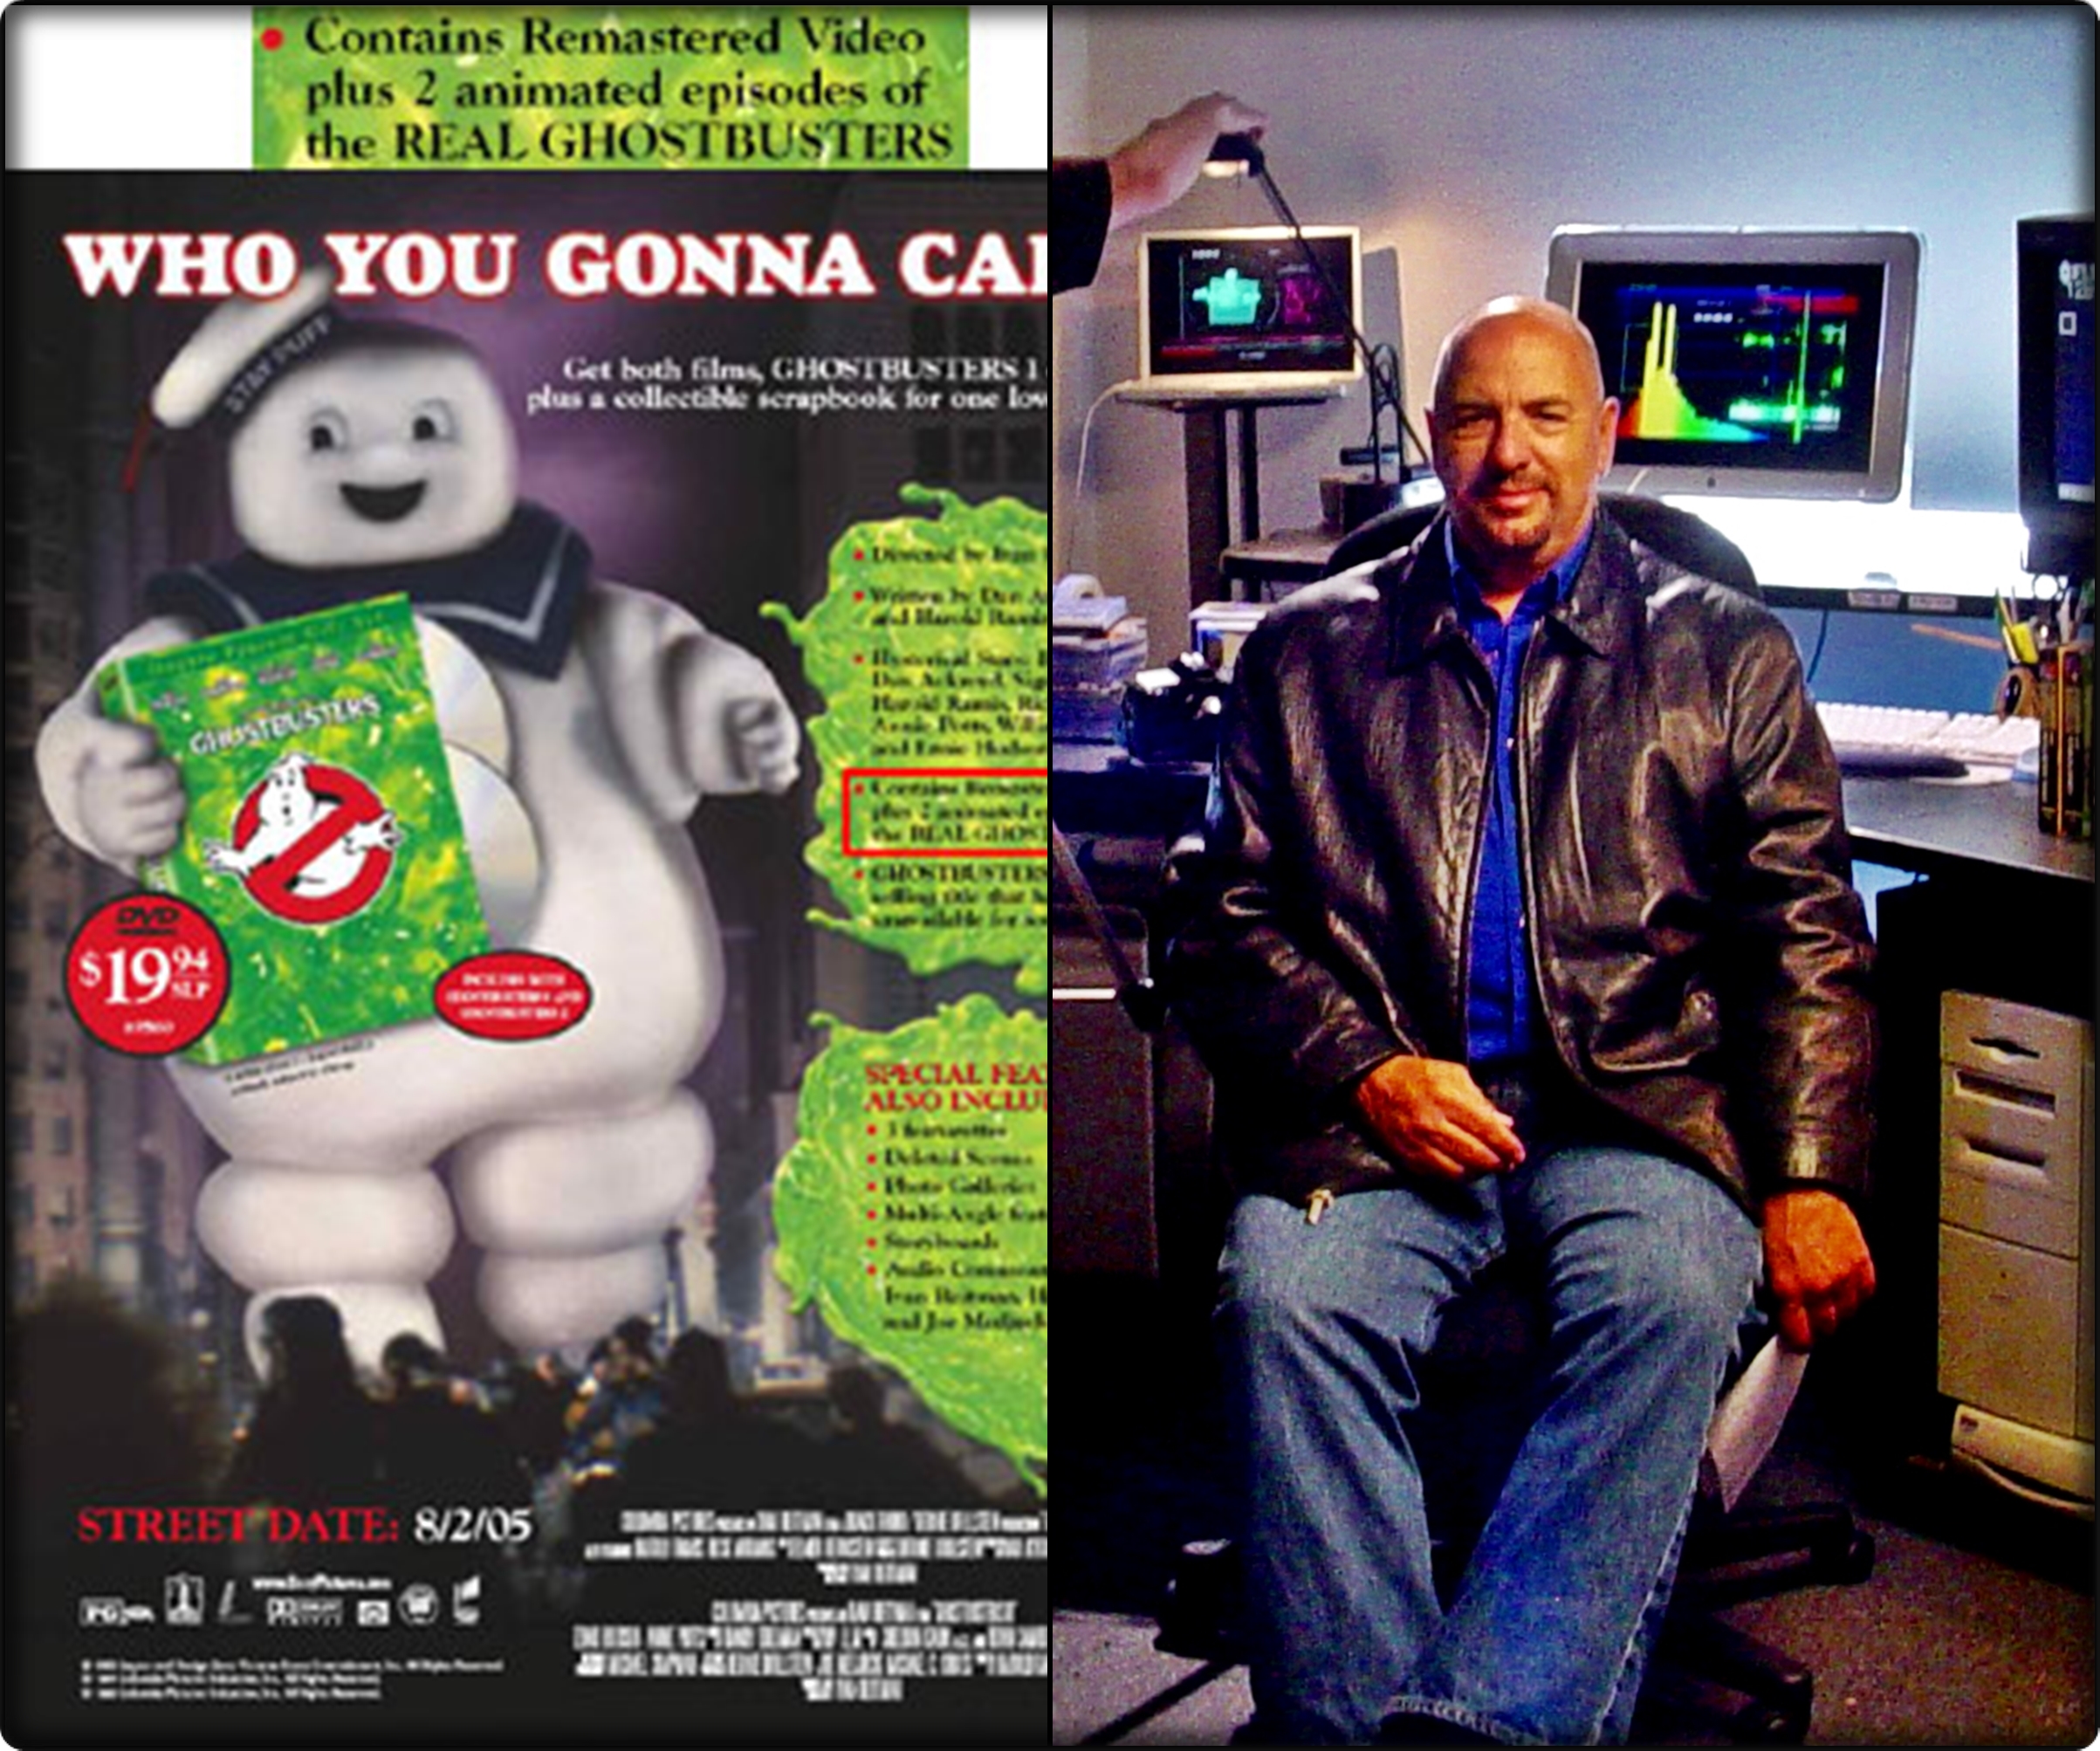 ISPR Parapsychologist & Ghost Expeditions creator Larry Montz filming the GHOSTBUSTERS Anniversary DVD theatrical commercial / featurette wrap-around; screened in over 9,000* U.S. movie theaters during Summer 2005 (*per SONY Home Entertainment).